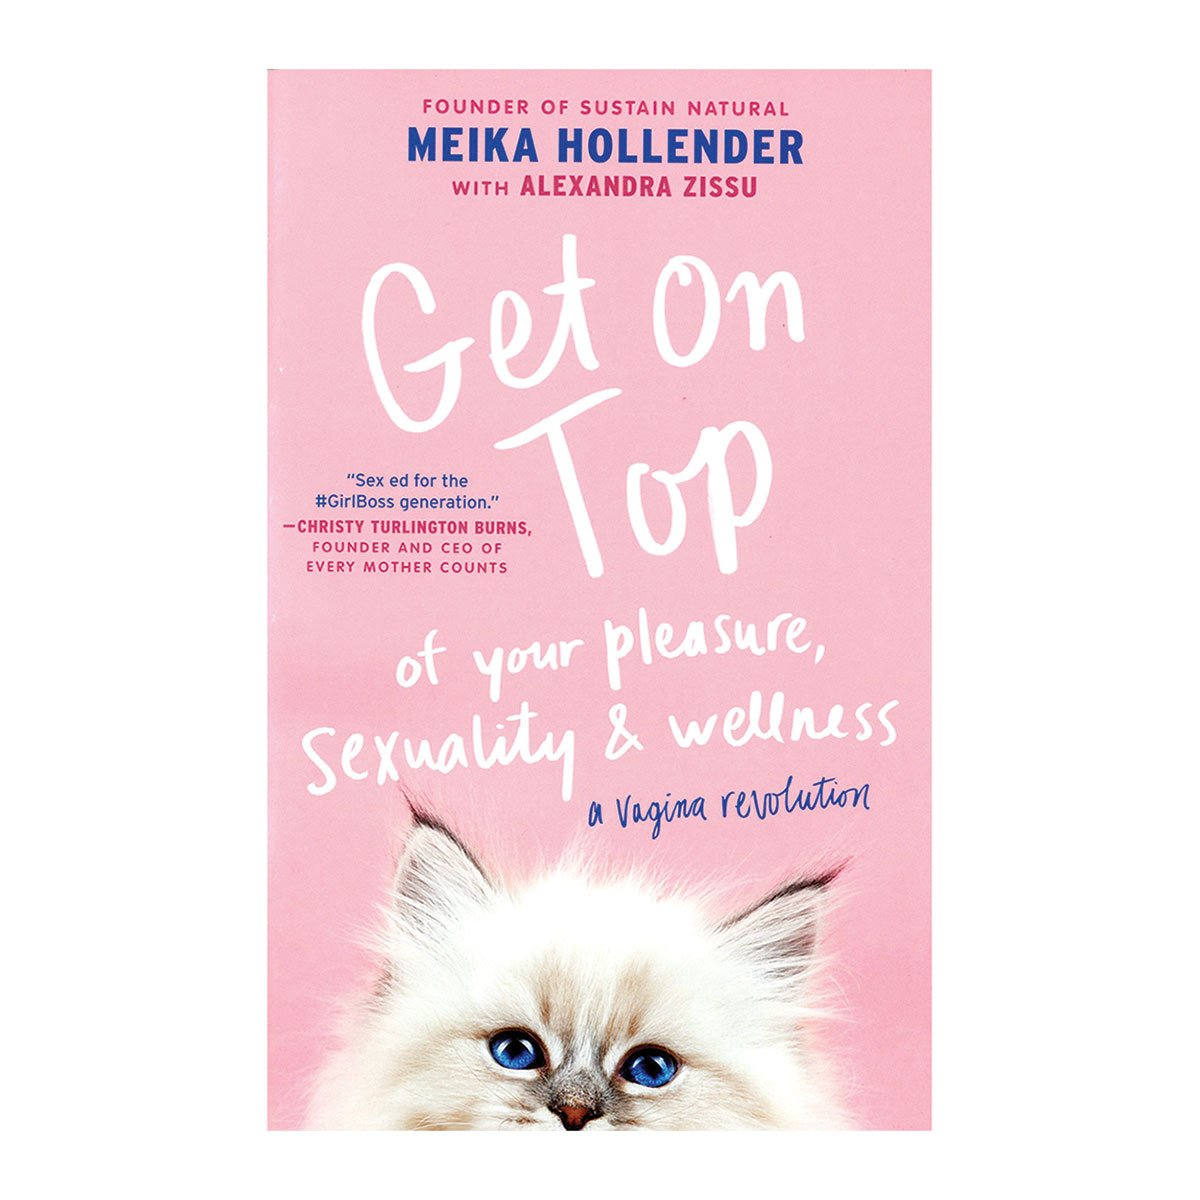 Get on Top of Your Pleasure, Sexuality & Wellness - Simon & Schuster